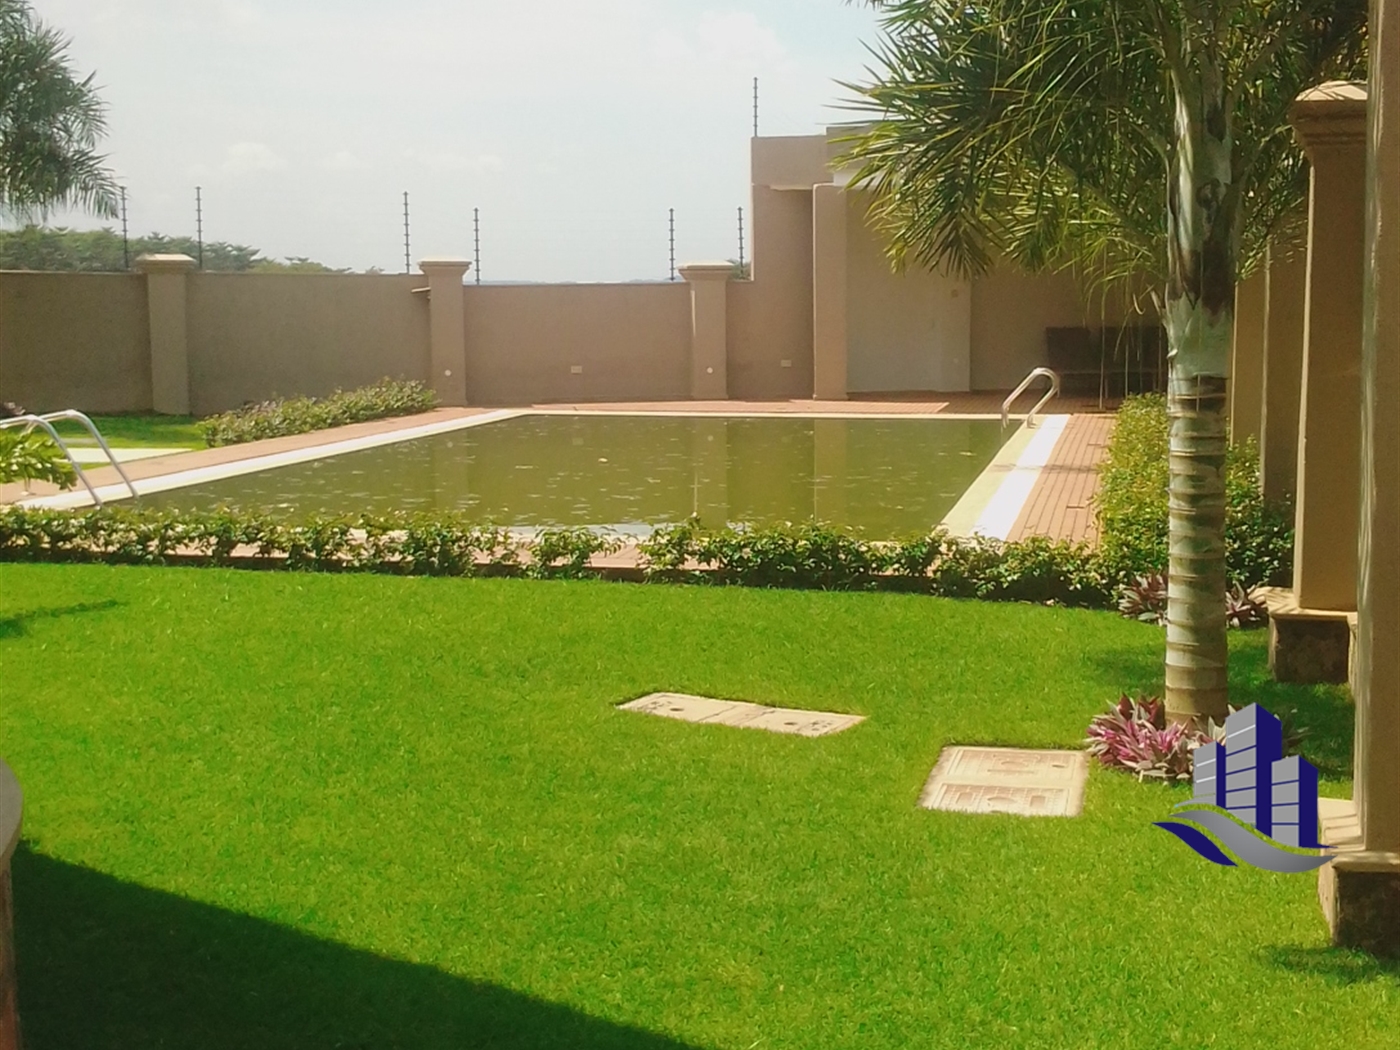 Mansion for sale in Busaabala Kampala